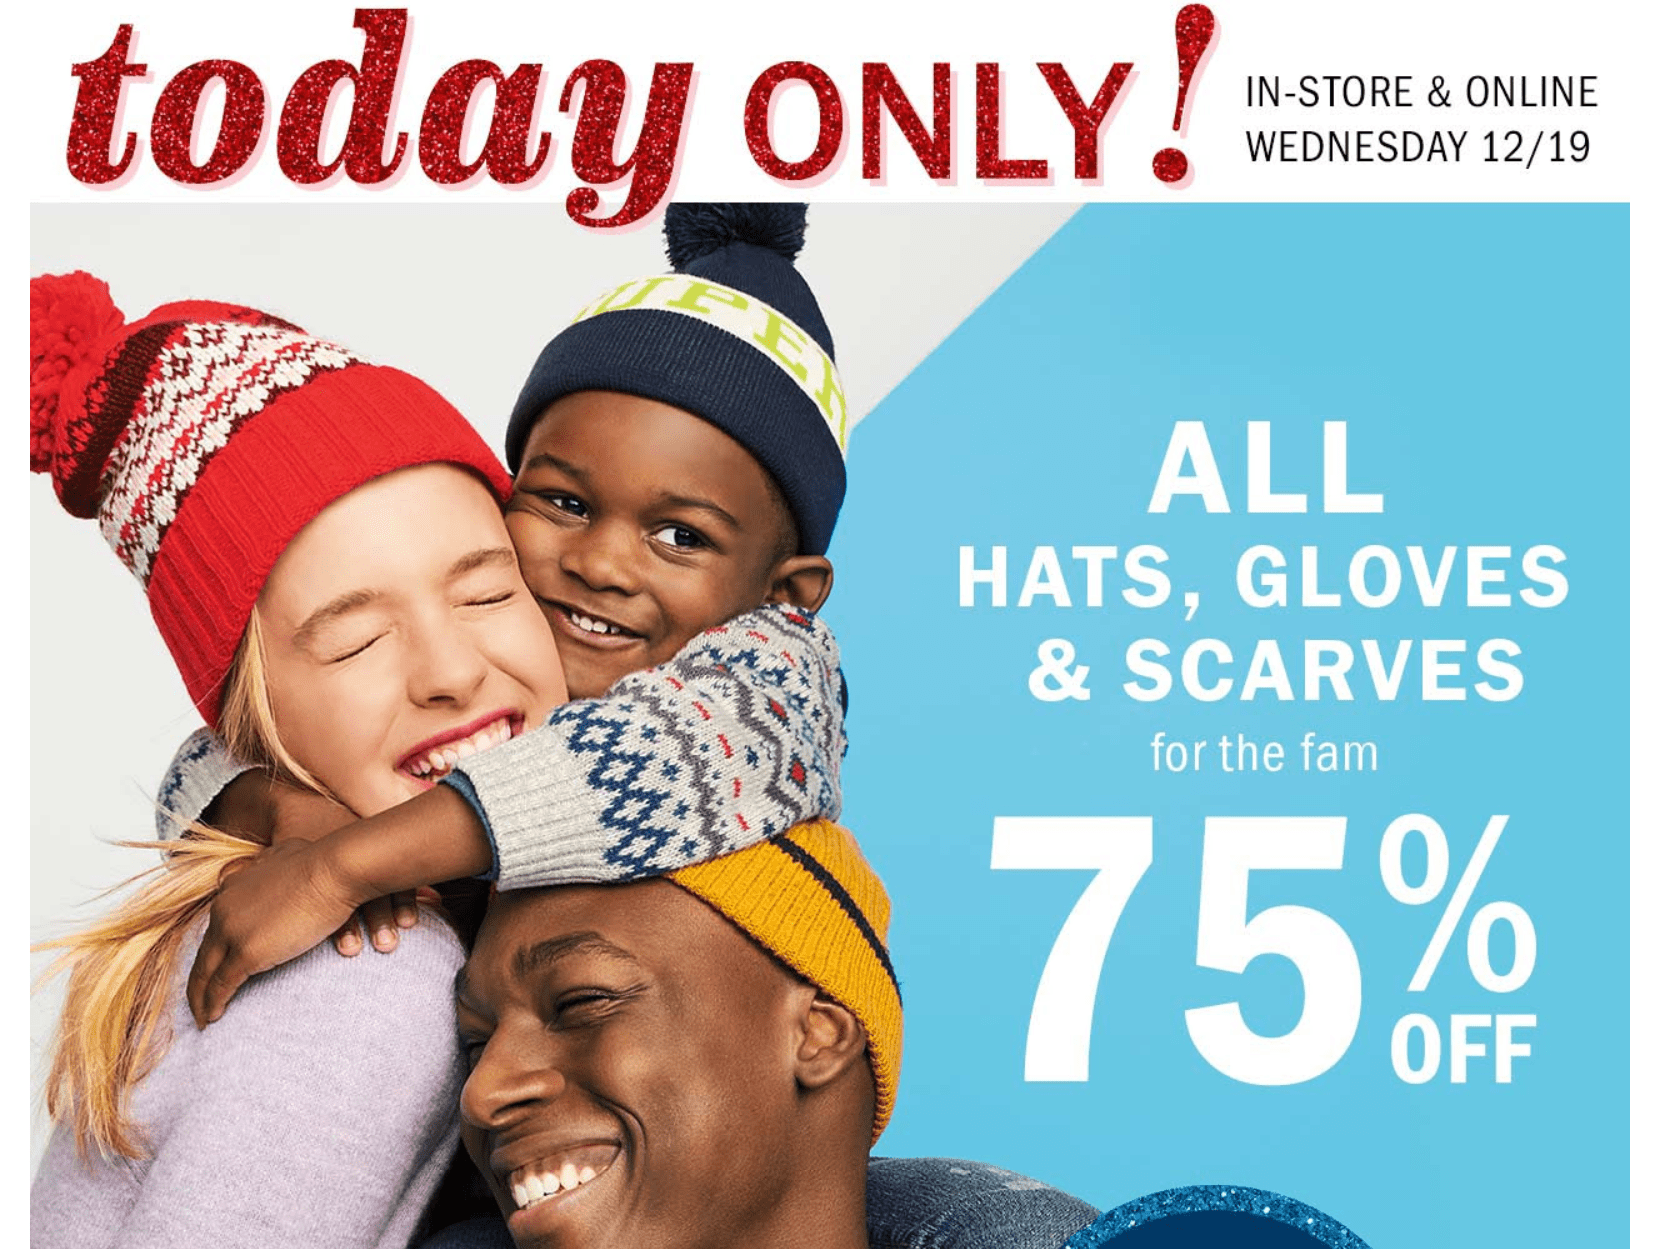 Old Navy: Hats, Gloves & Scarves 75% ONLY 12/19